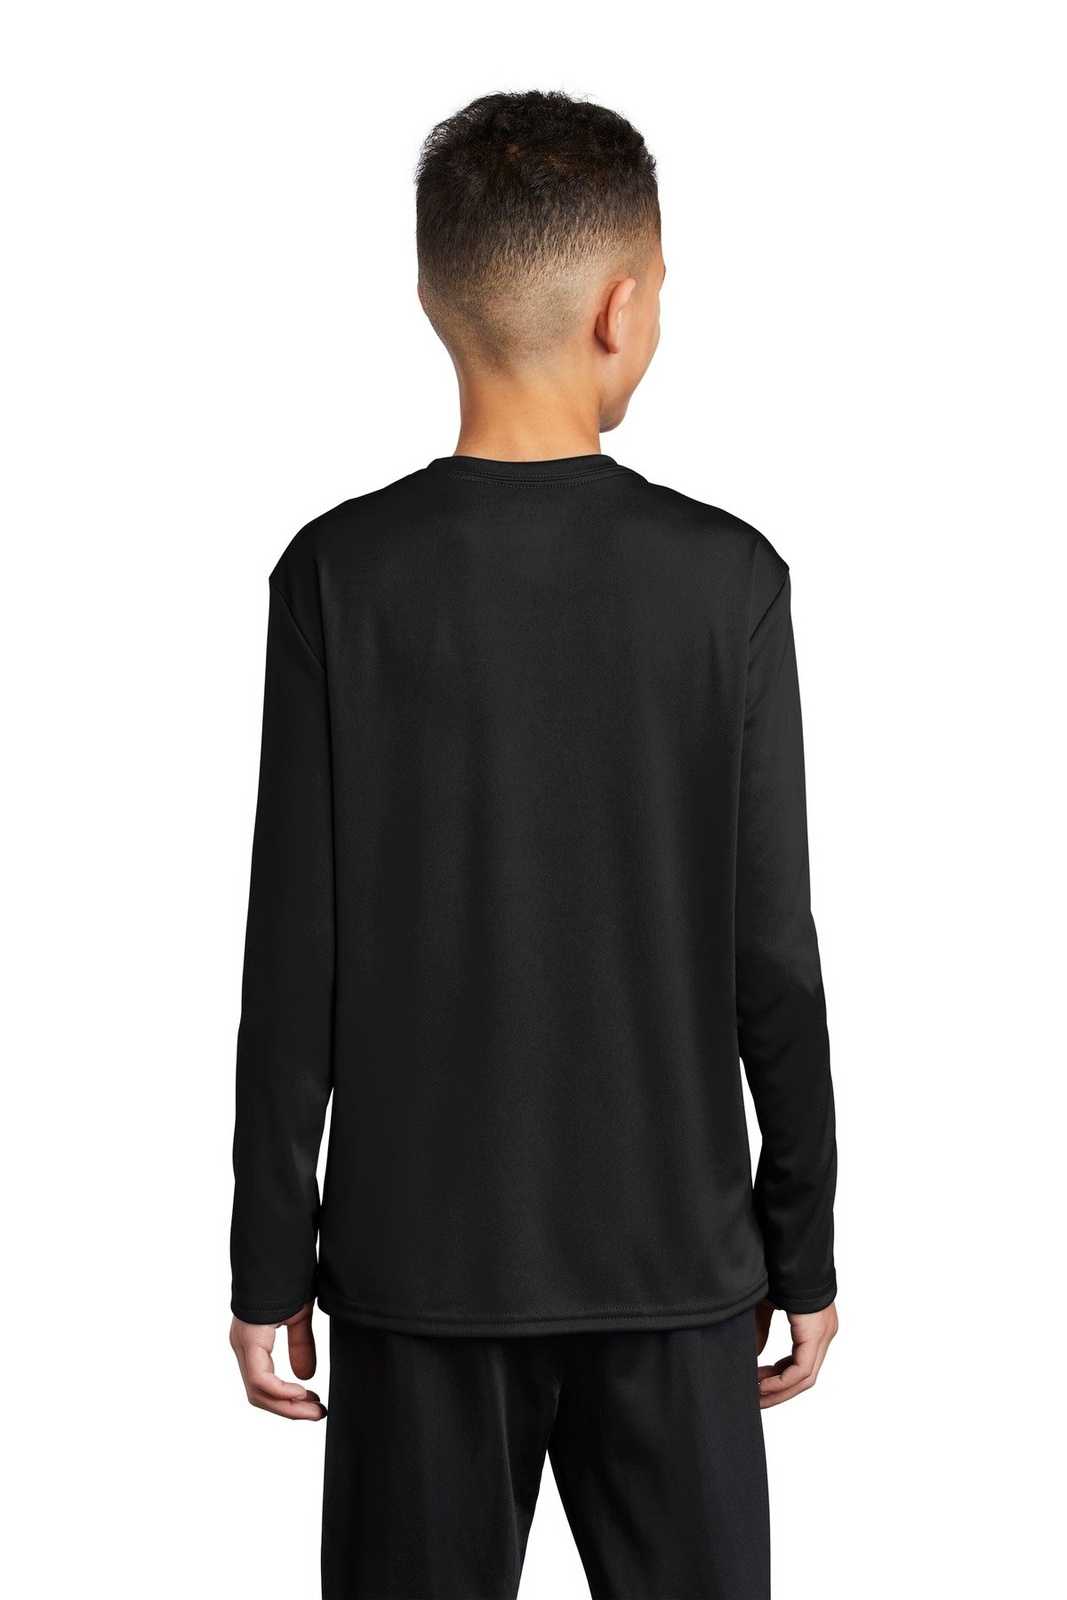 Port & Company PC380YLS Youth Long Sleeve Performance Tee - Jet Black - HIT a Double - 1